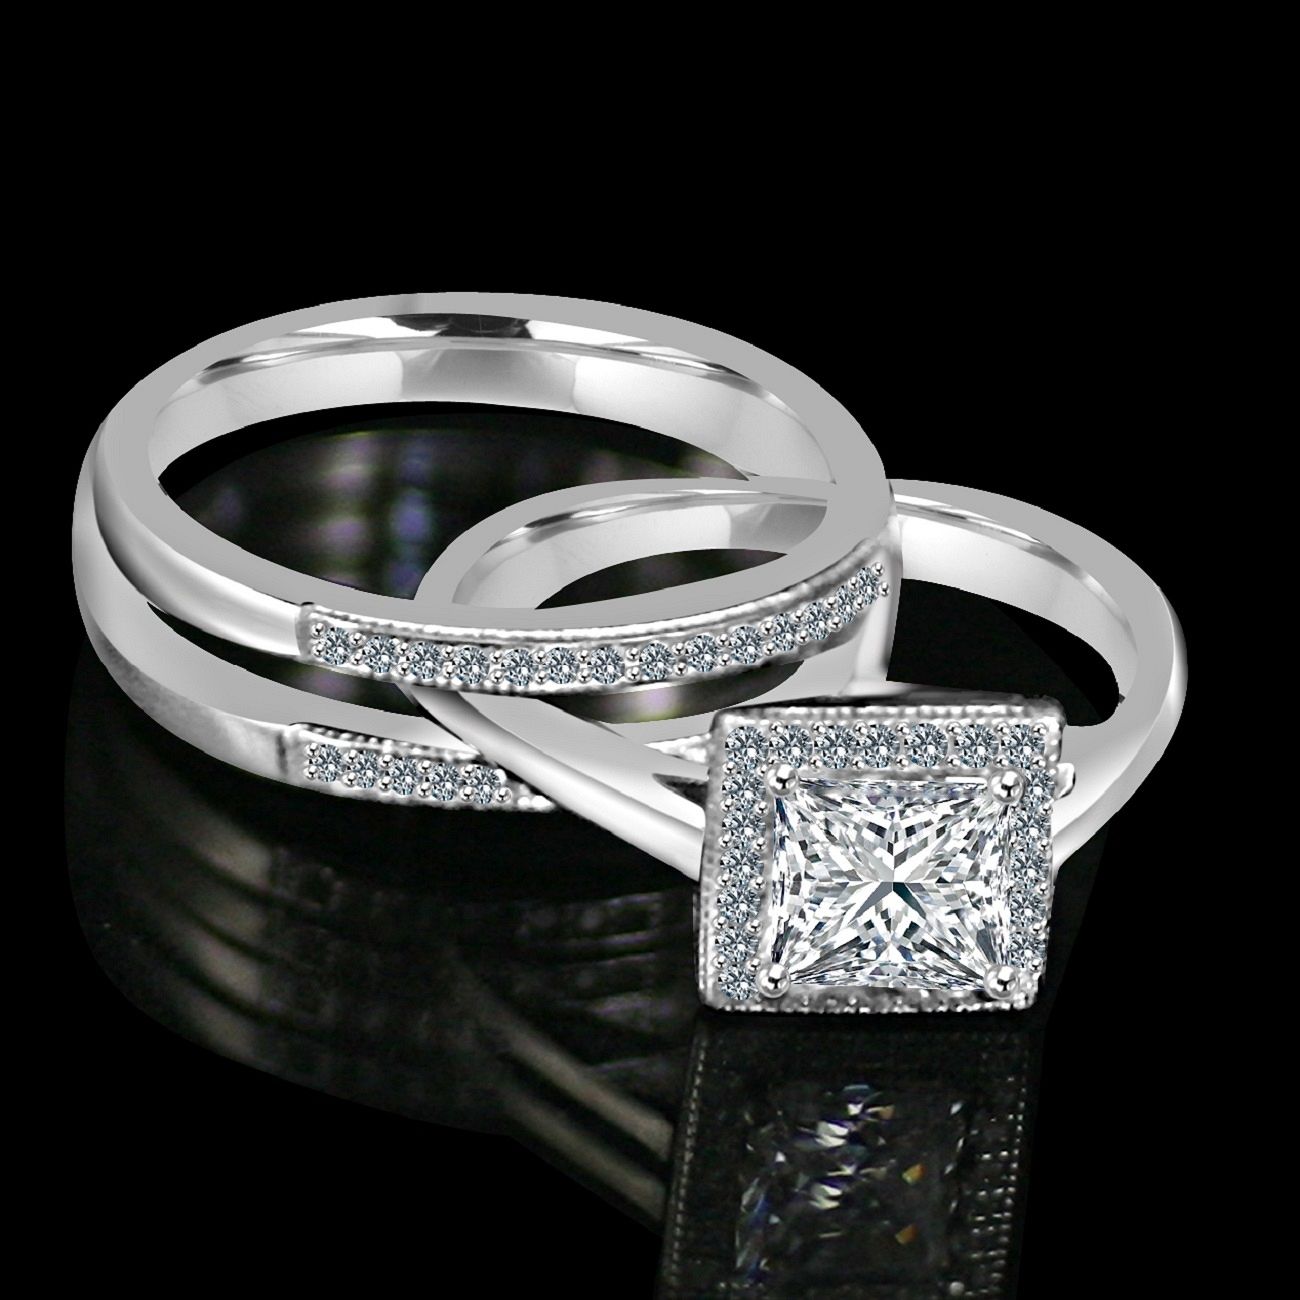 1CT. intensely Radiant Diamond Veneer Princess Cut w/Halo housed in a Double band jacket Simulated Engagement/Wedding Ring. 635R4012